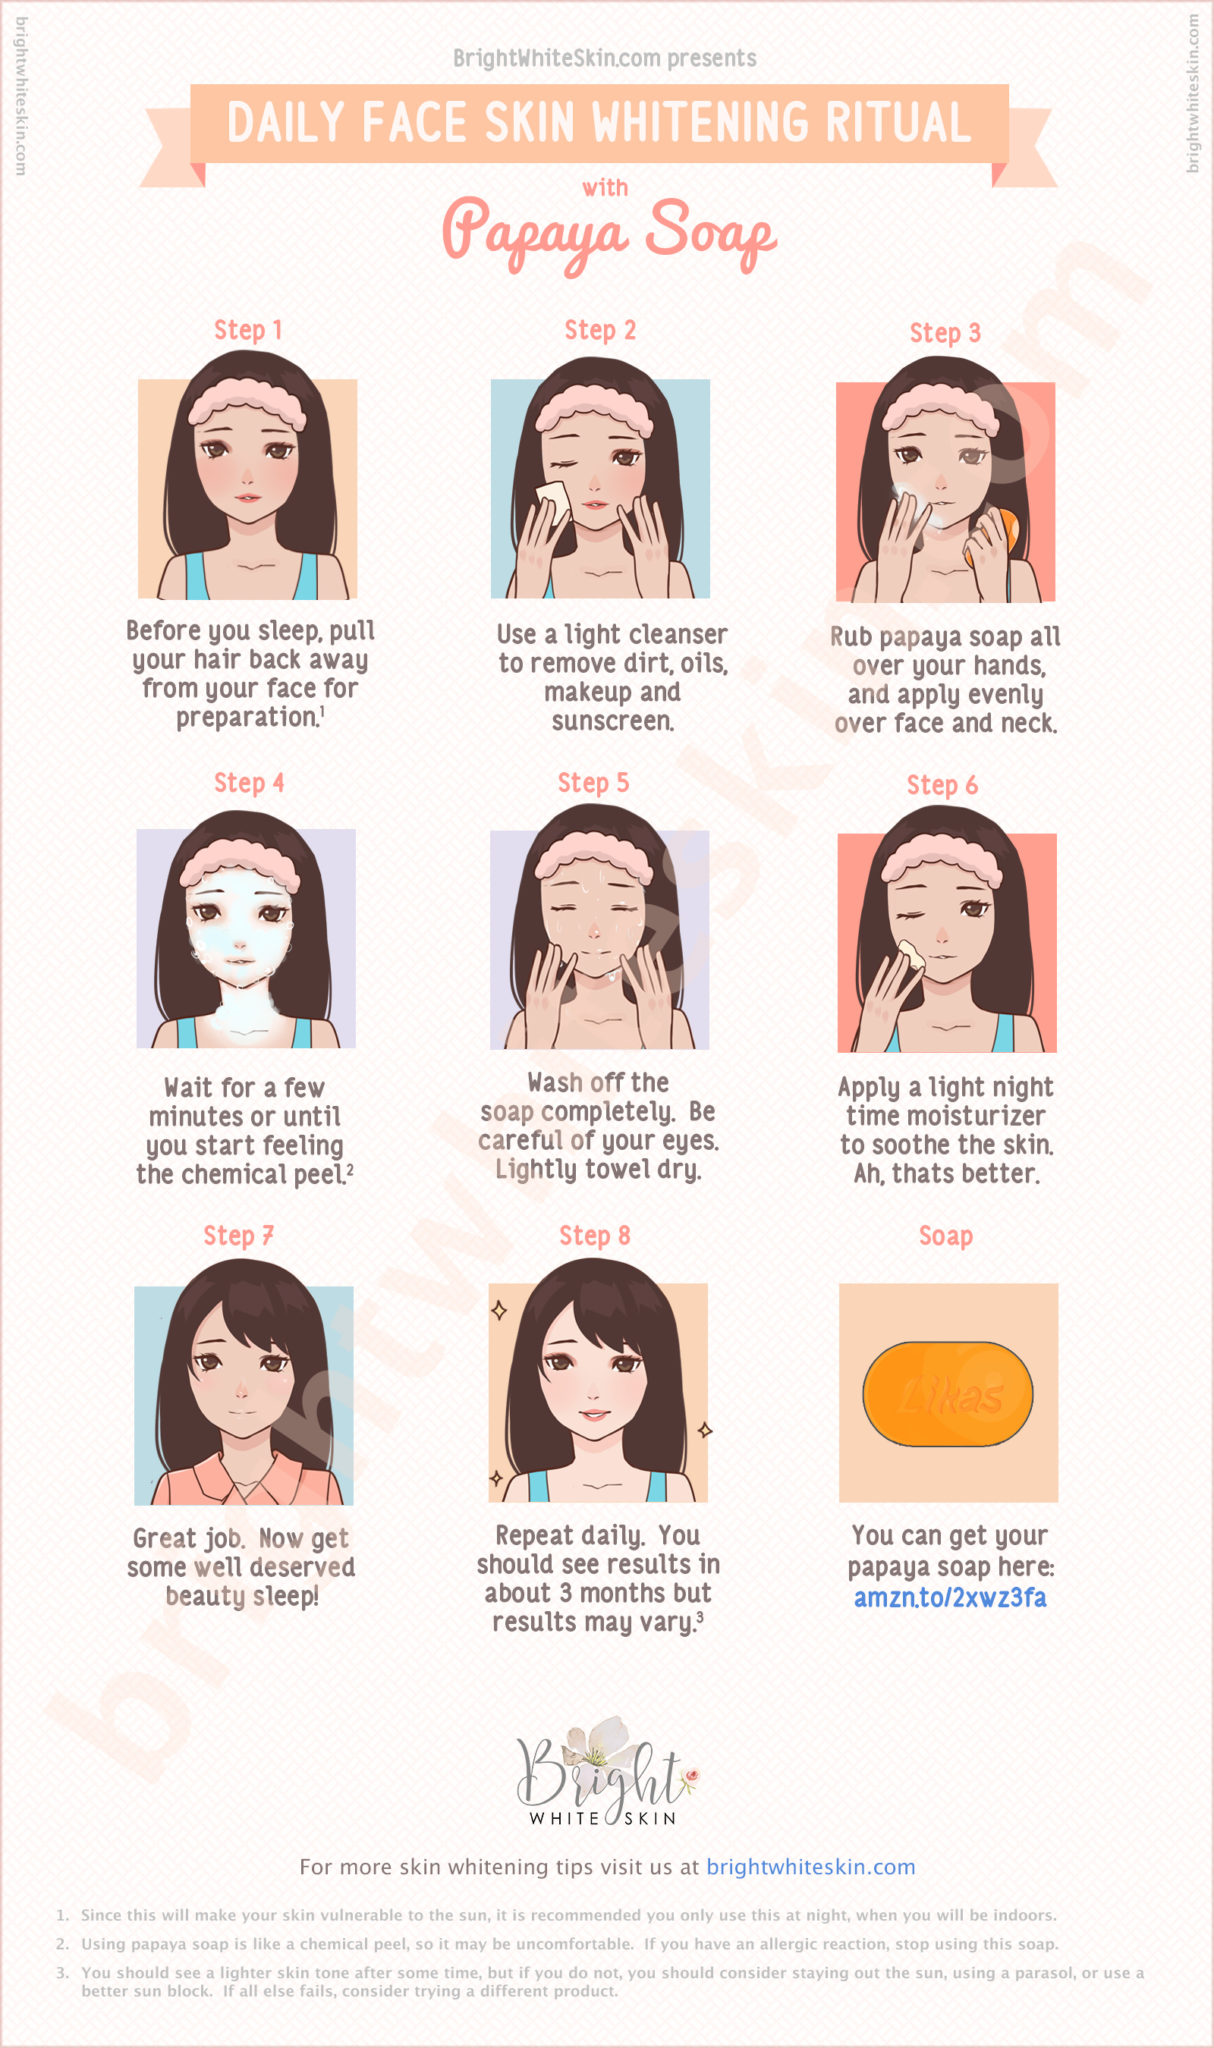 What is skin whitening?